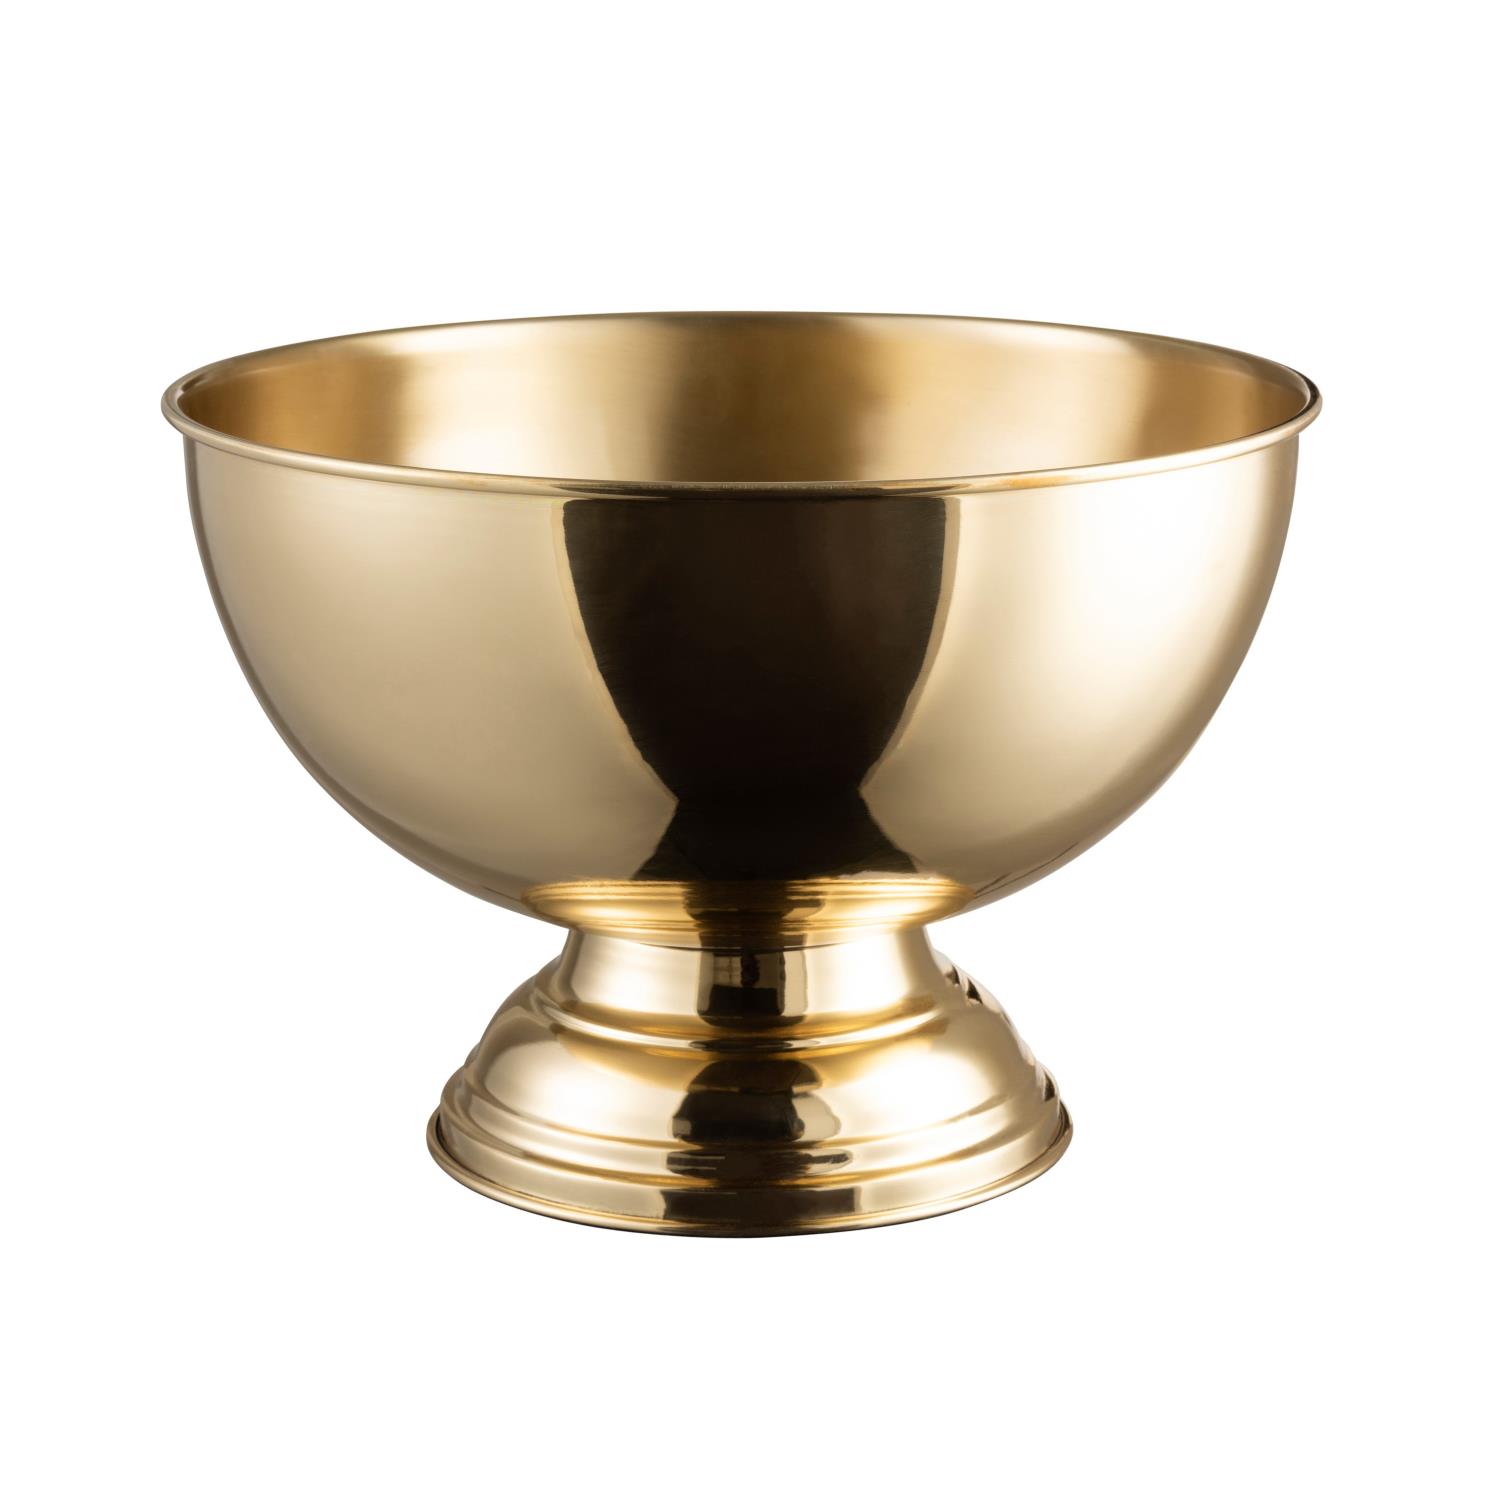 Champagne Coupe Brass 39x39xh25cm 96539